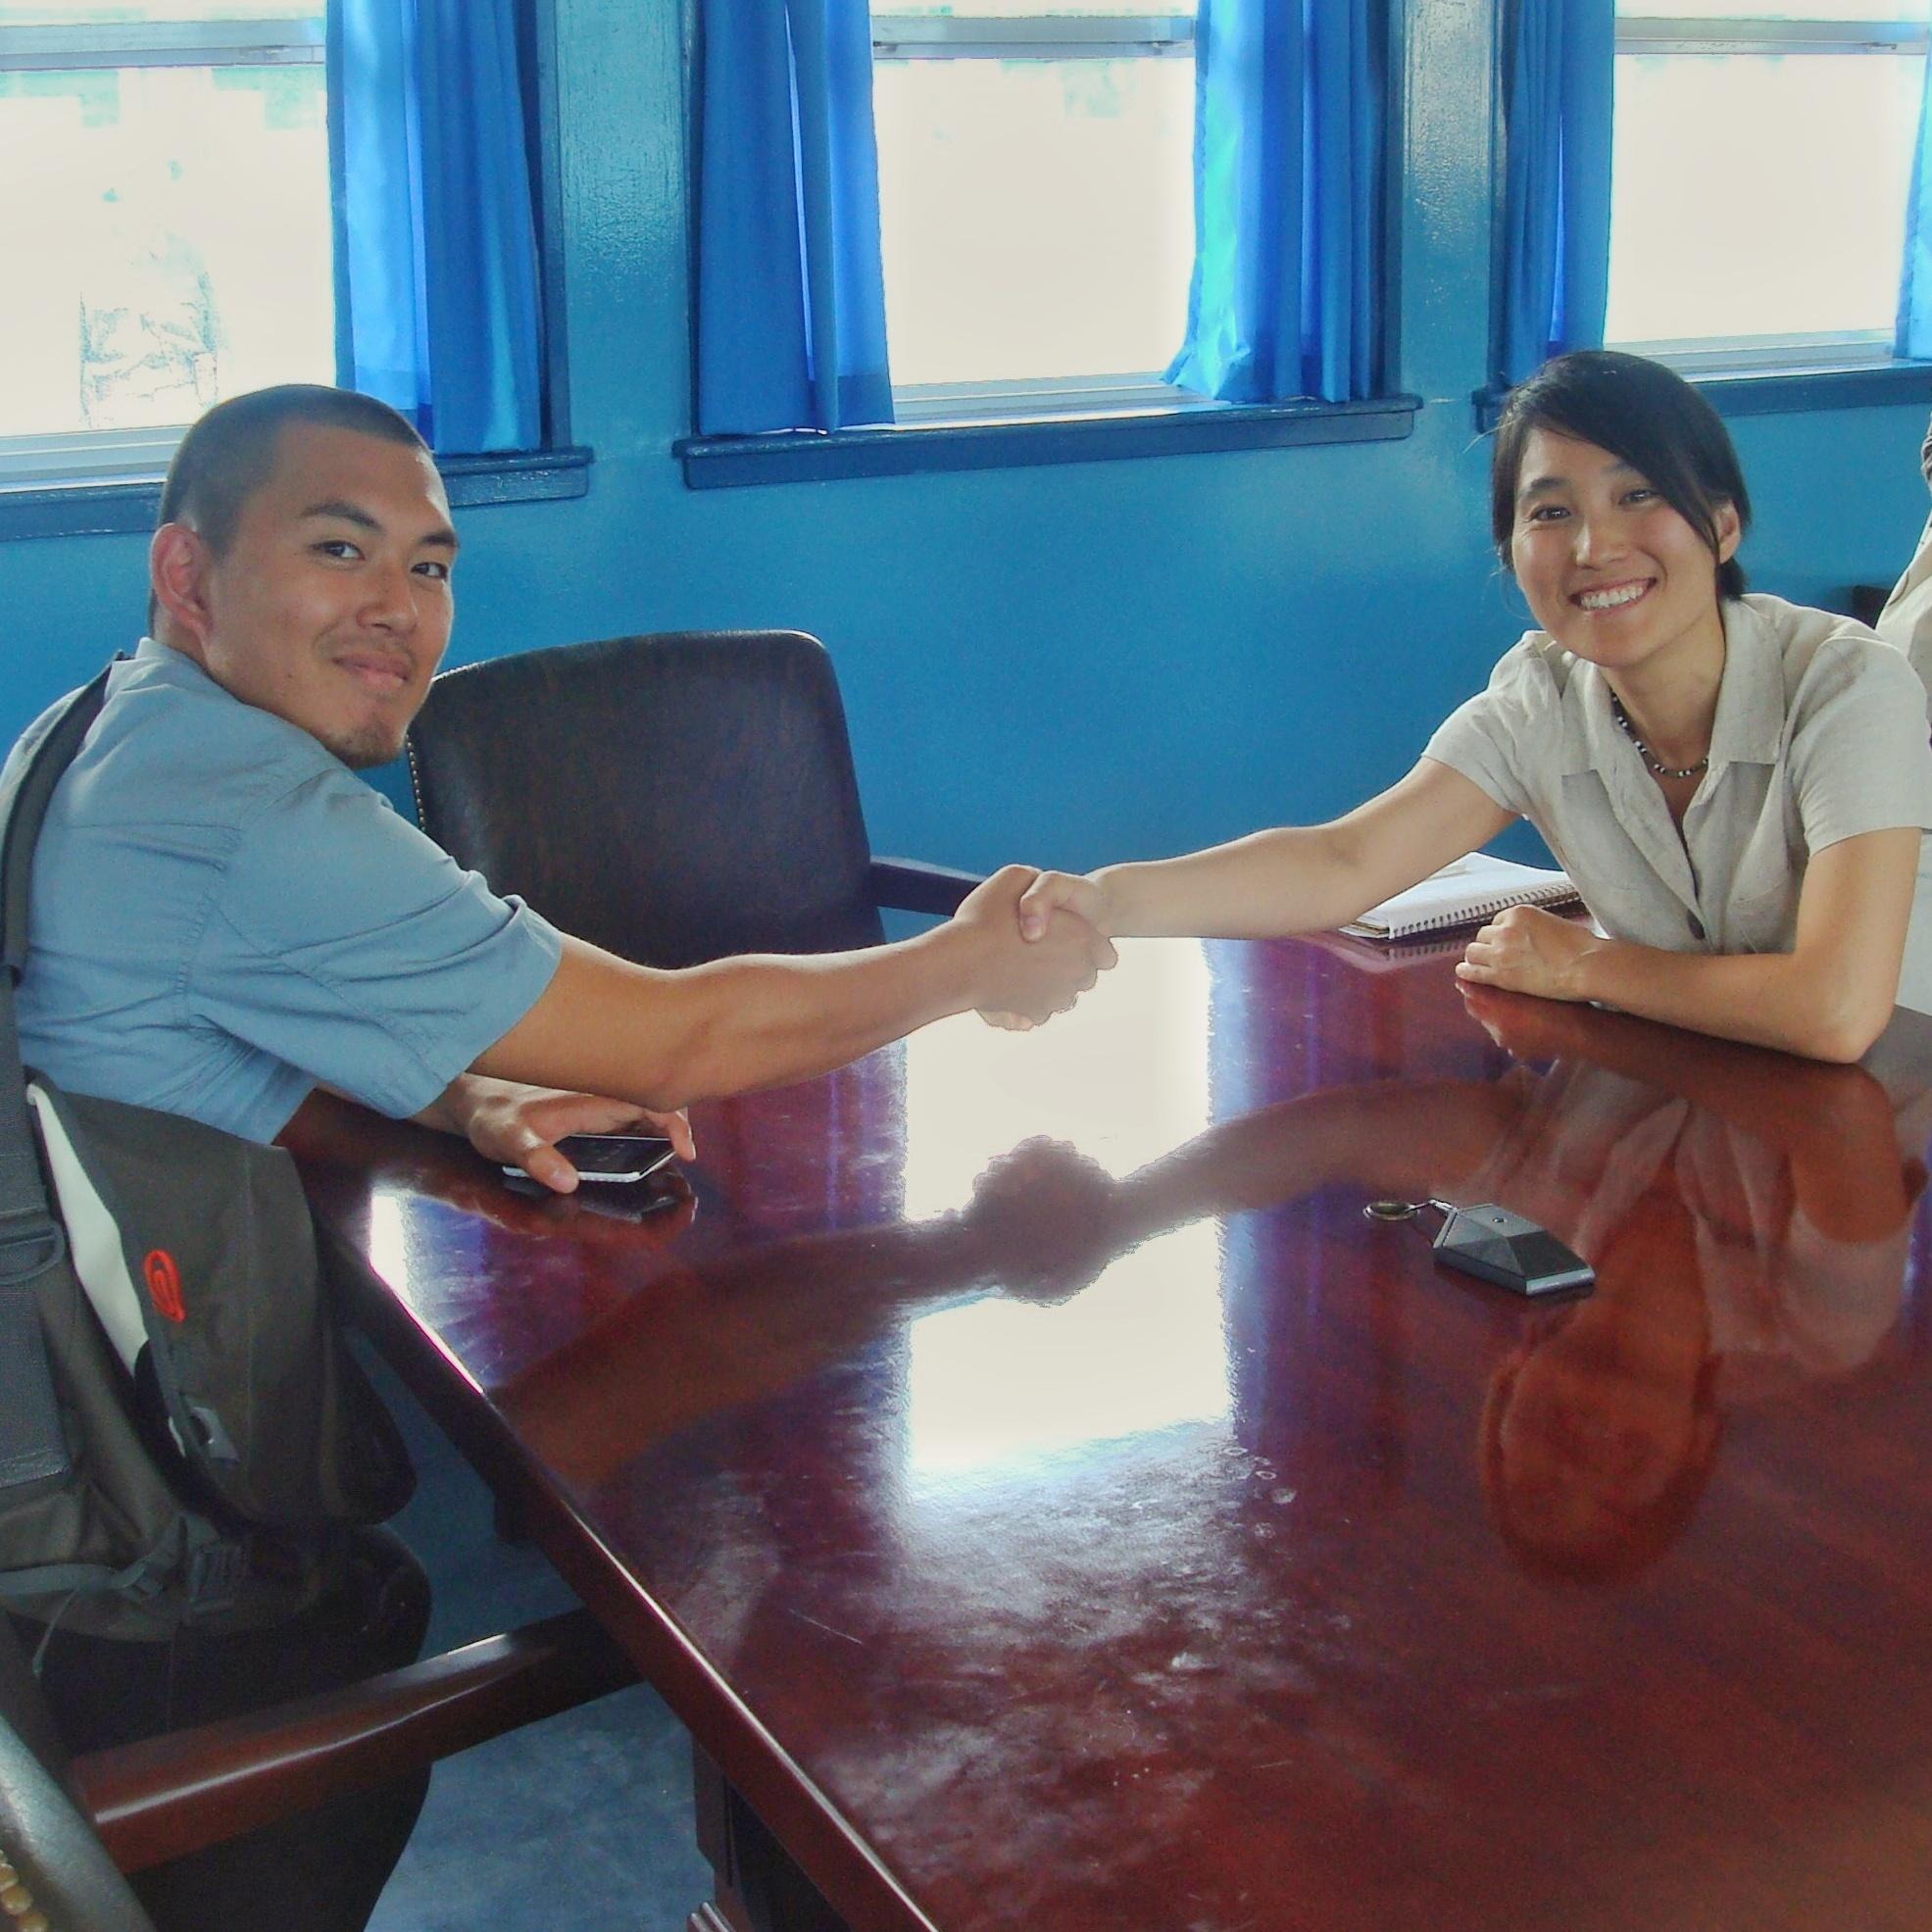 Two Korean people sit at a desk and hold hands across the desk at a blue building at the DMZ.